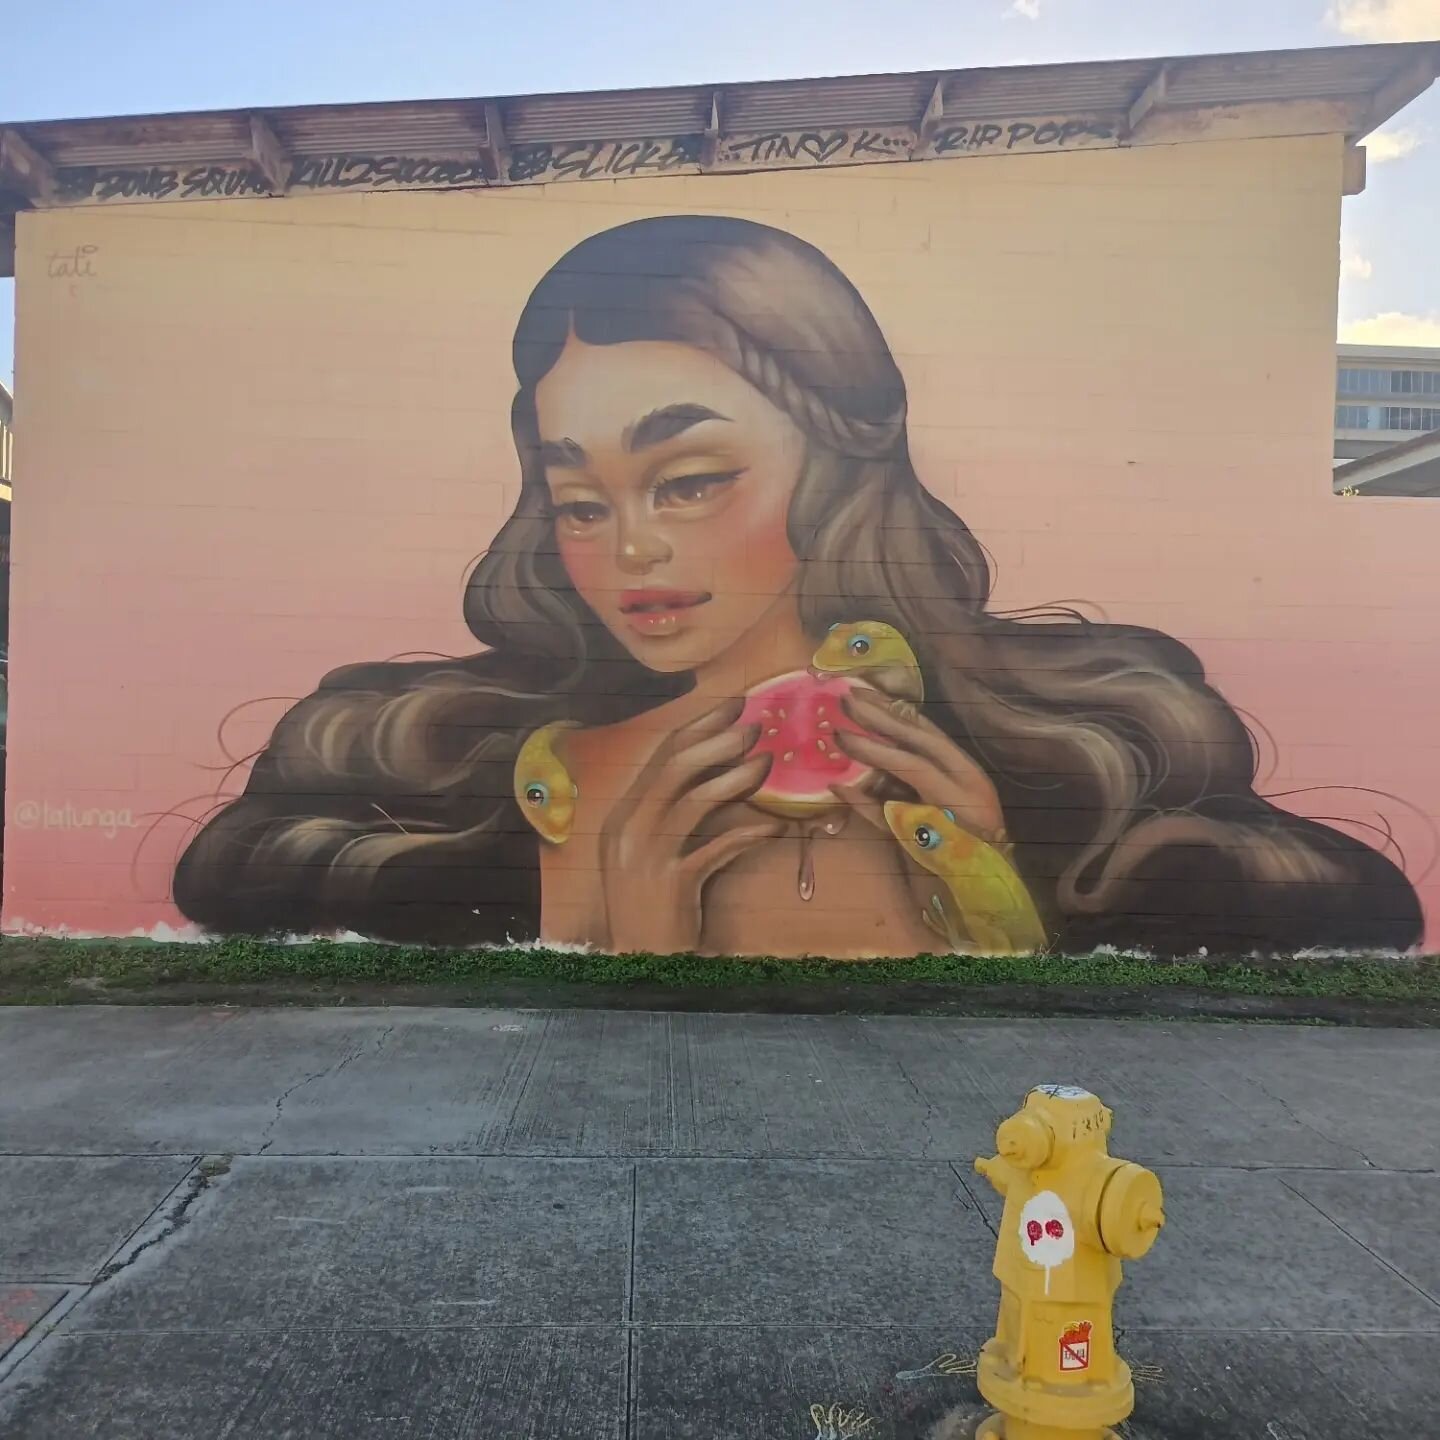 On my latest trip to Honolulu I stopped by the #kakaakowallart and it was AMAZING! So much great art, I wish I could post them all. You'll just have to see for your self :) 

My apologies for any artist that I did not tag- if you know them please tag